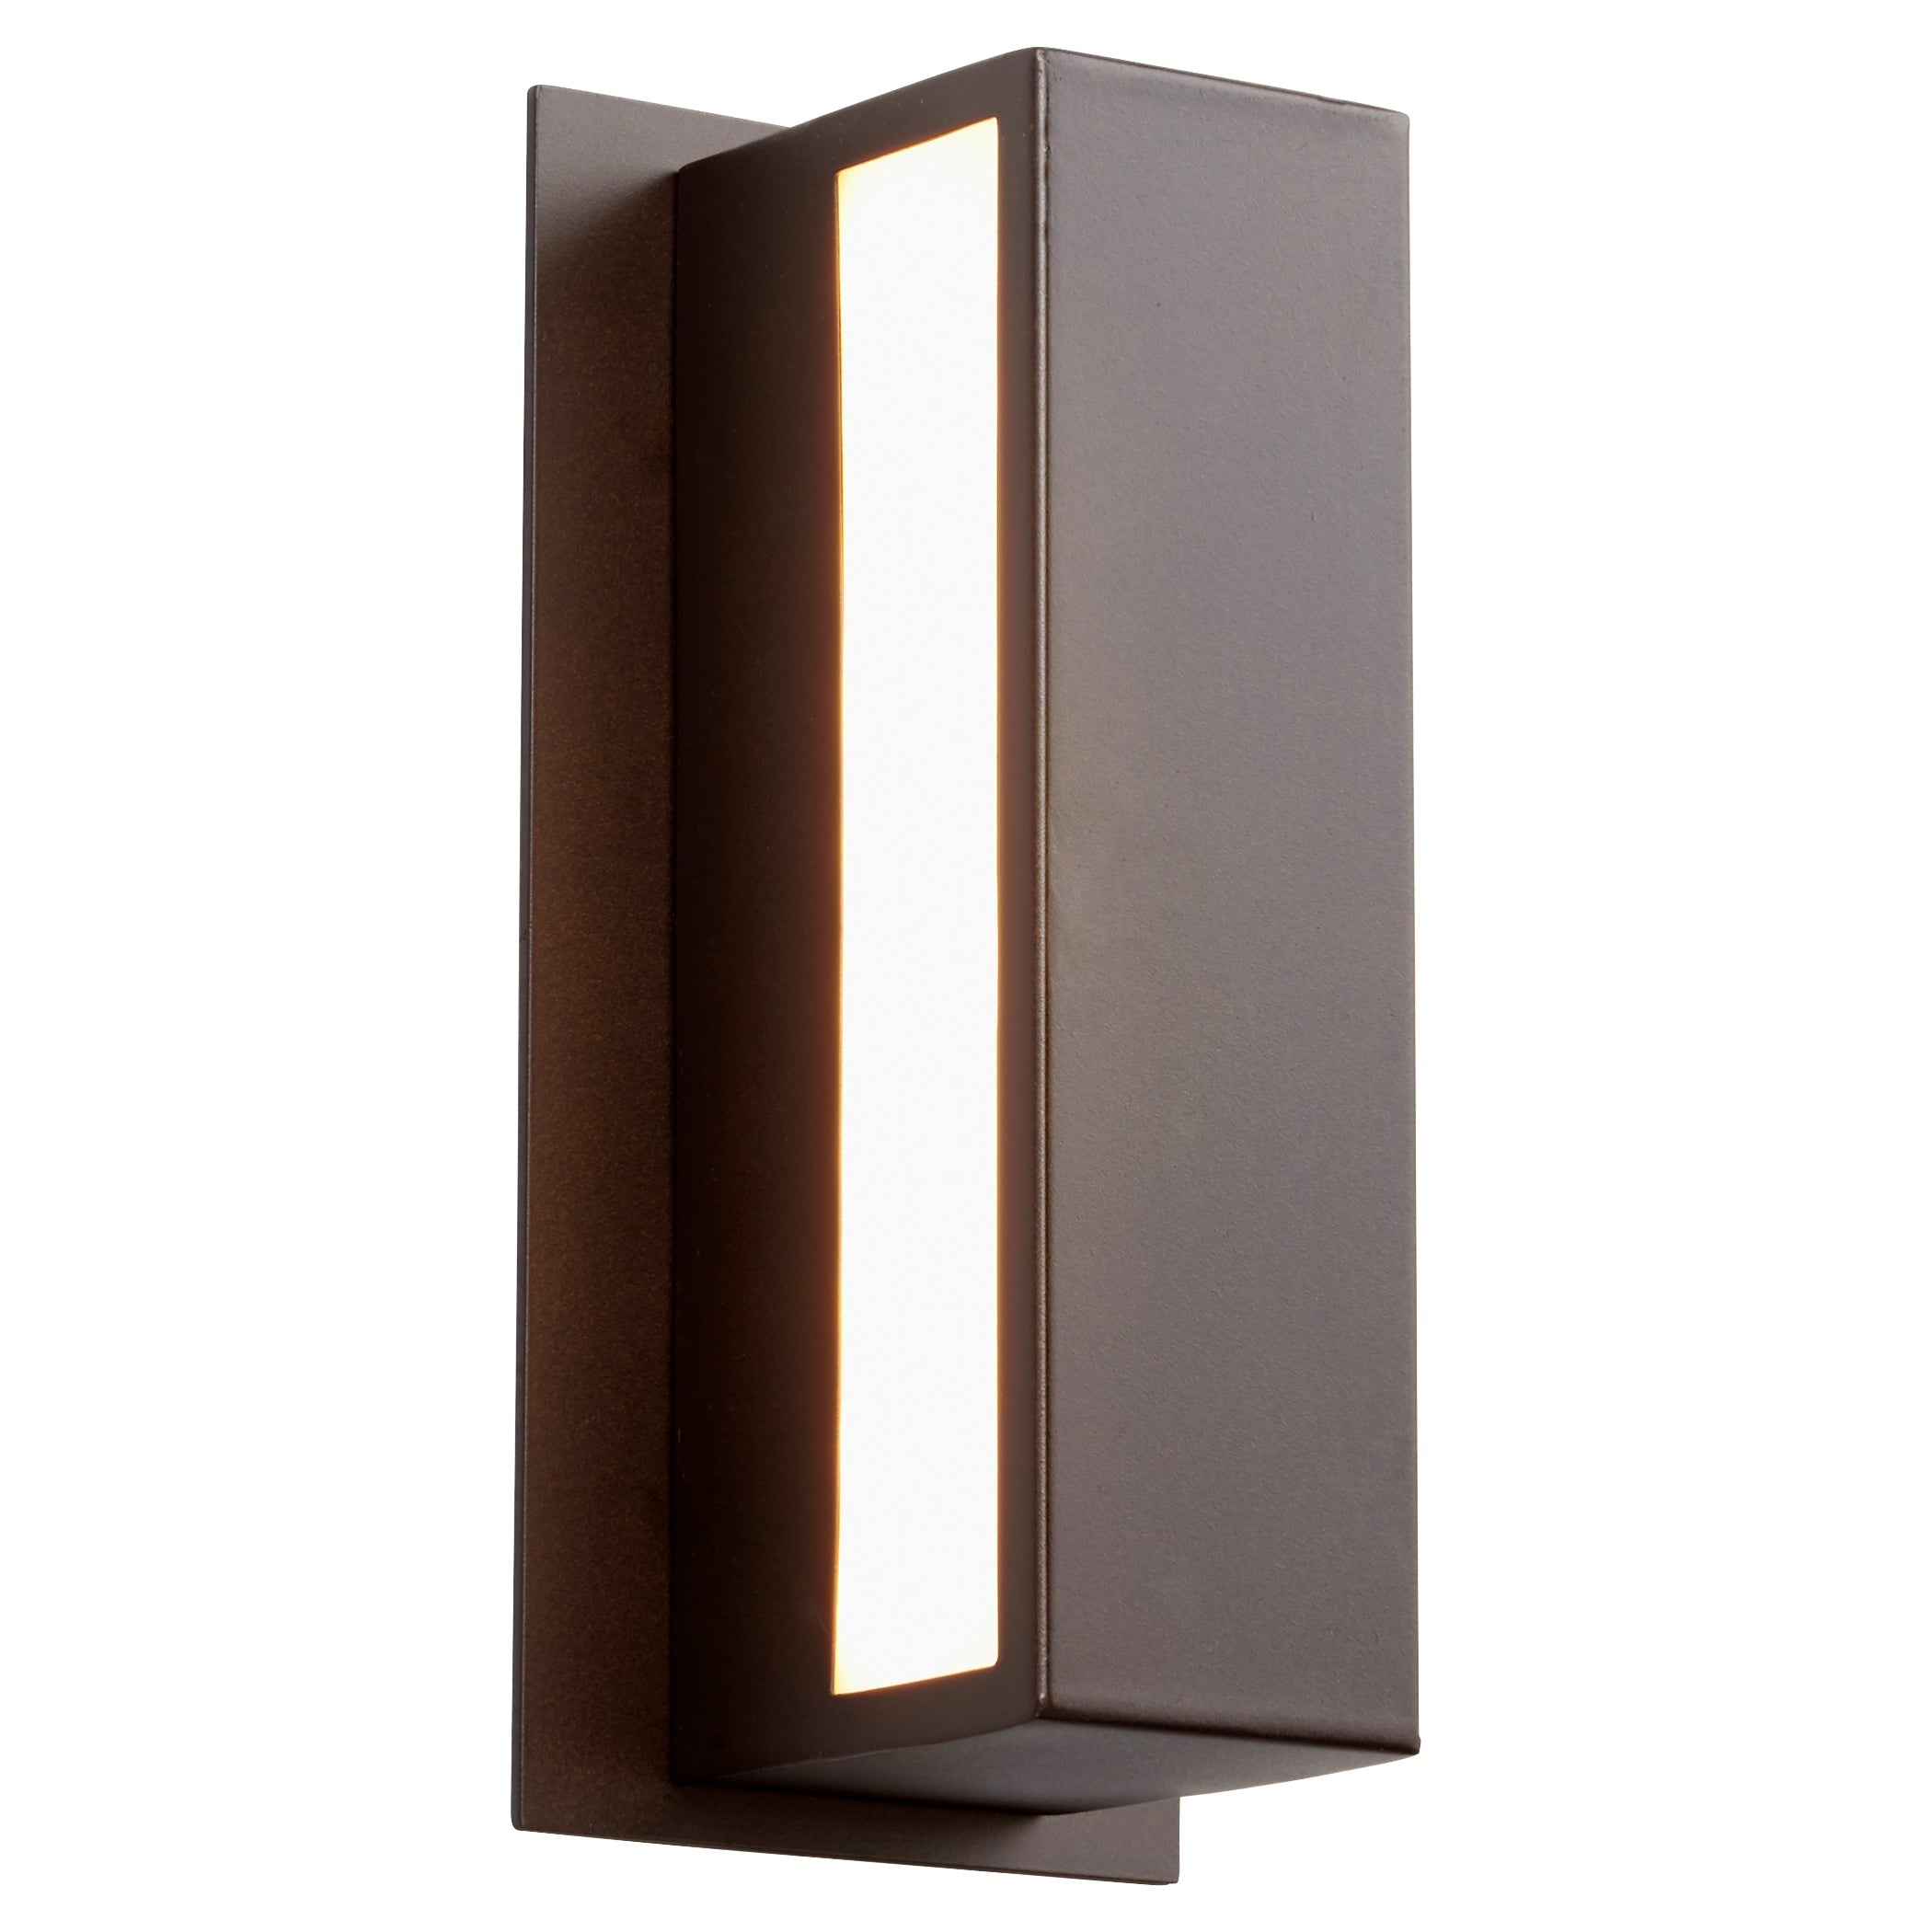 Oxygen Maia 3-740-22 Sconce - Oiled Bronze